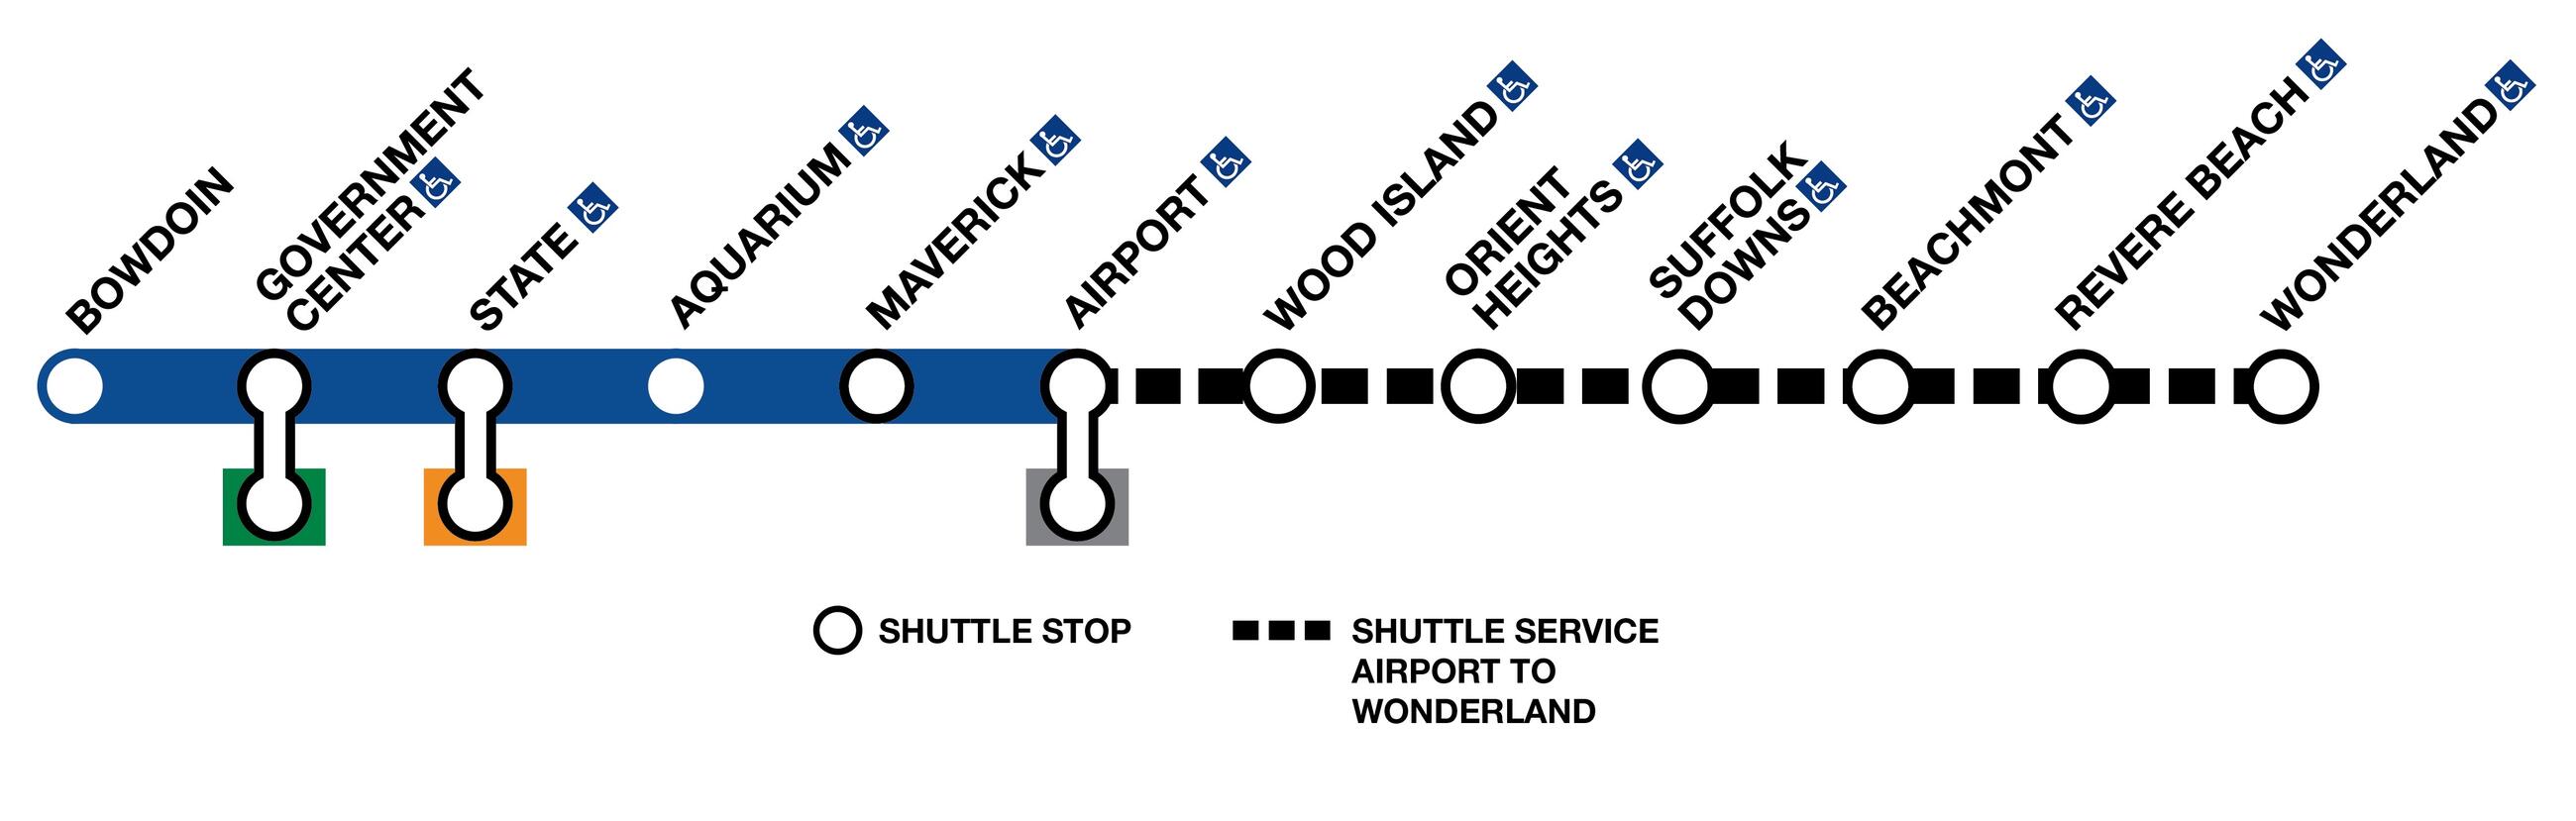 Diagram showing Blue Line diversion with a shuttle stop at Airport towards Wonderland